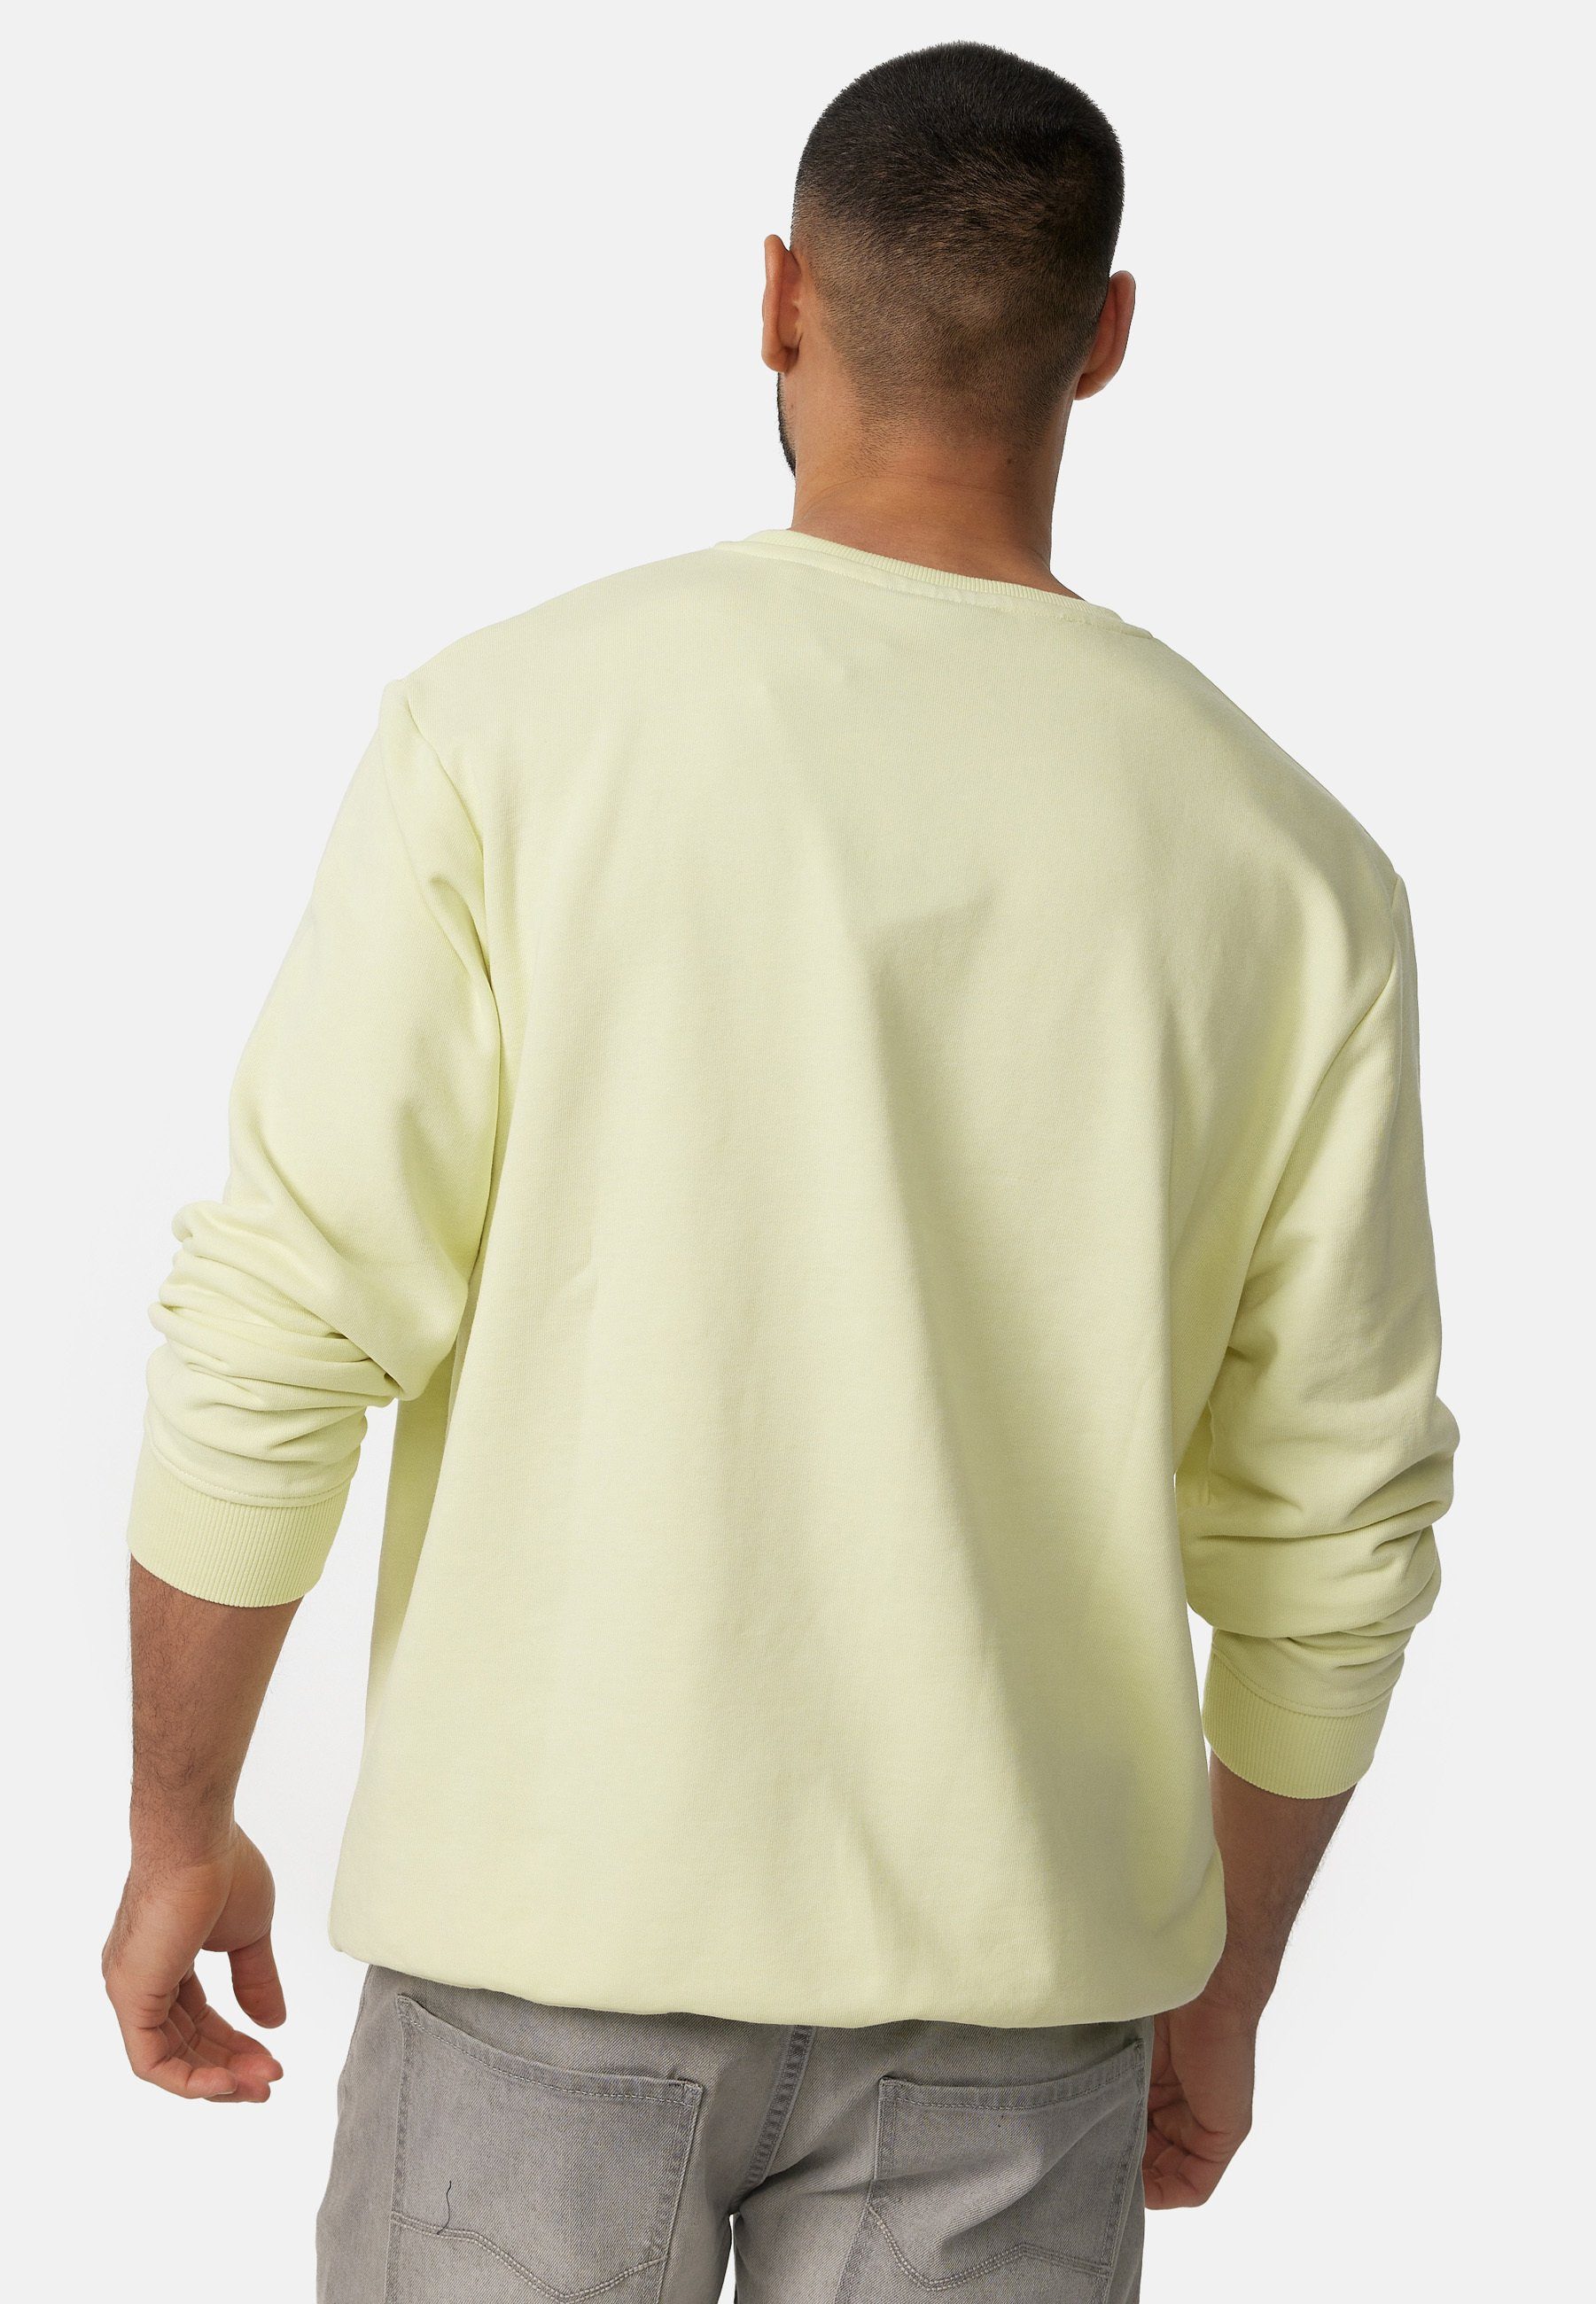 Indicode Holt Young Wheat Sweater